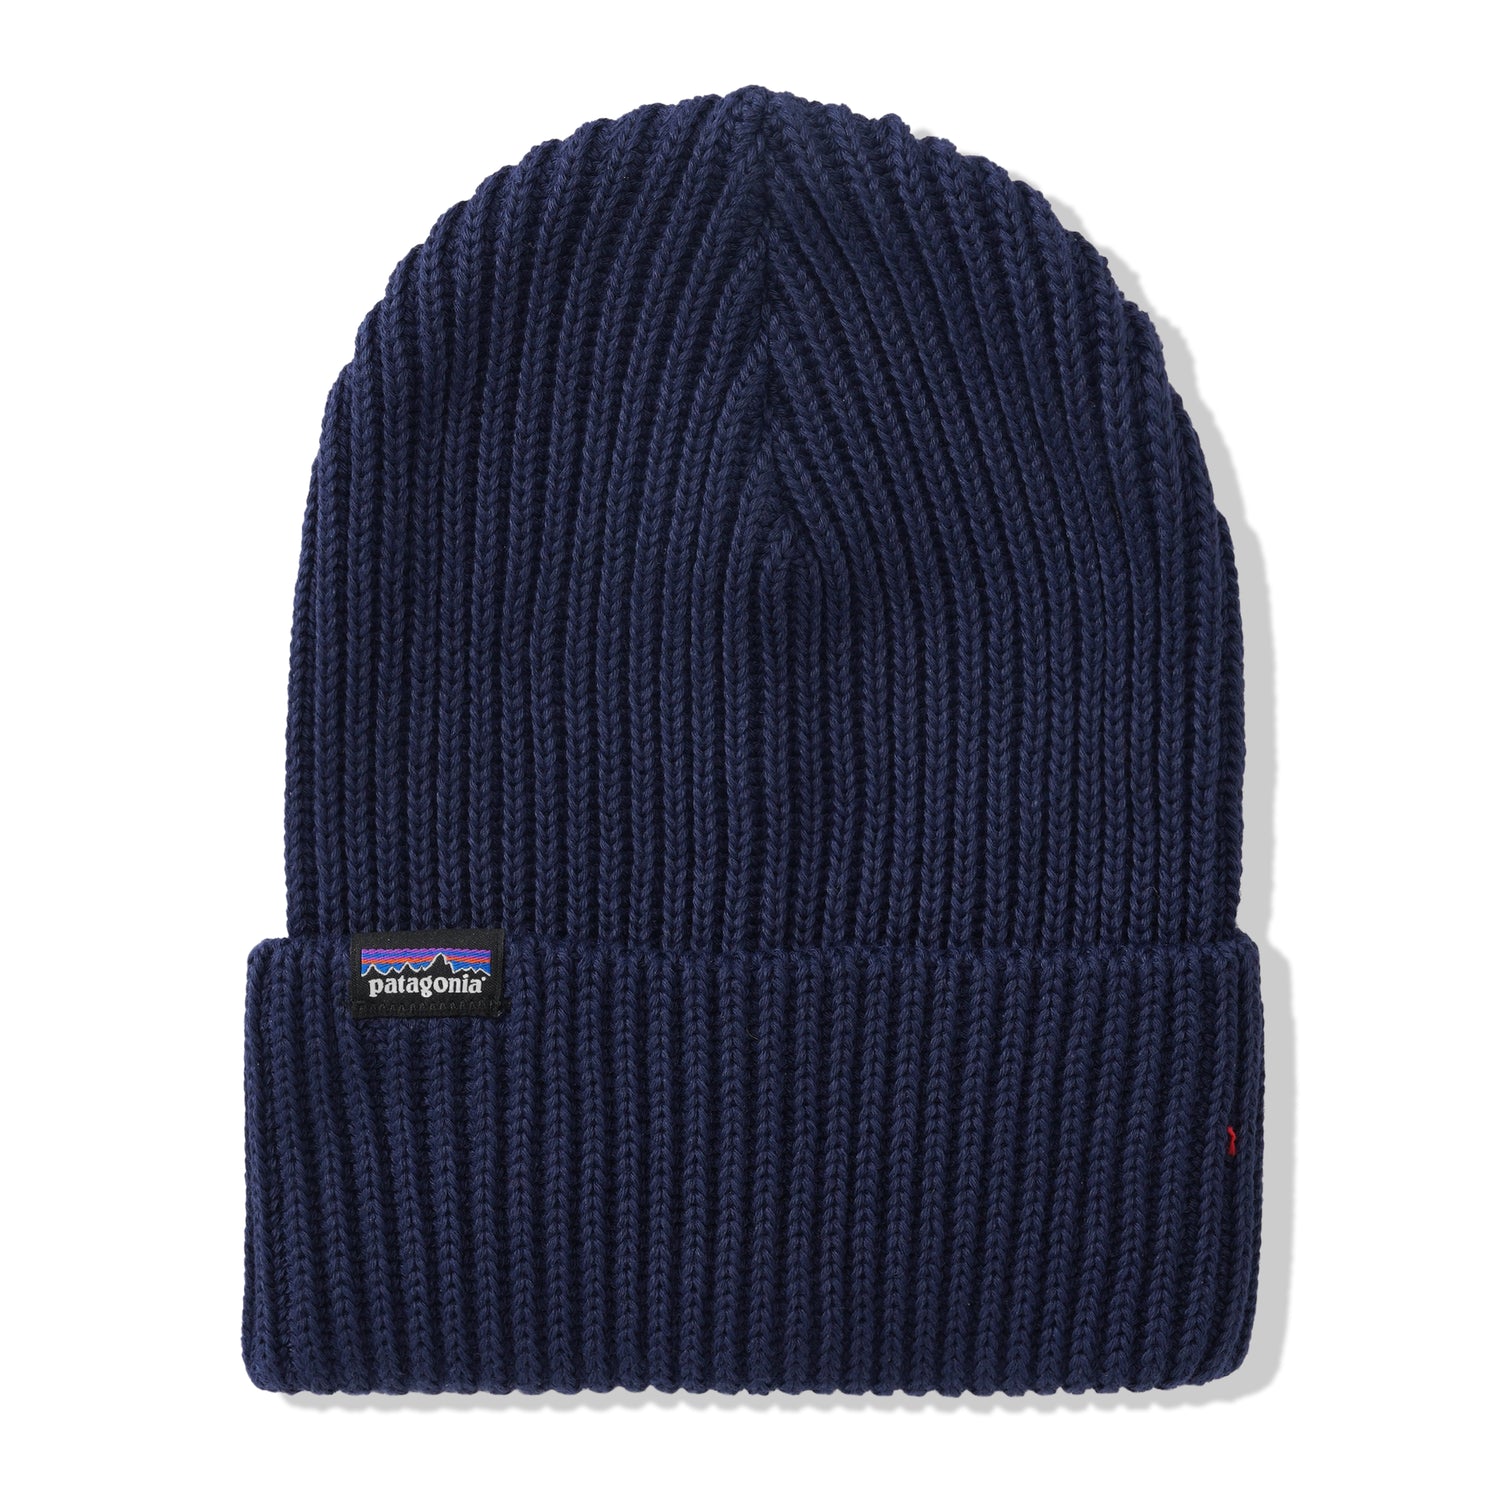 Fishermans Rolled Beanie, Navy